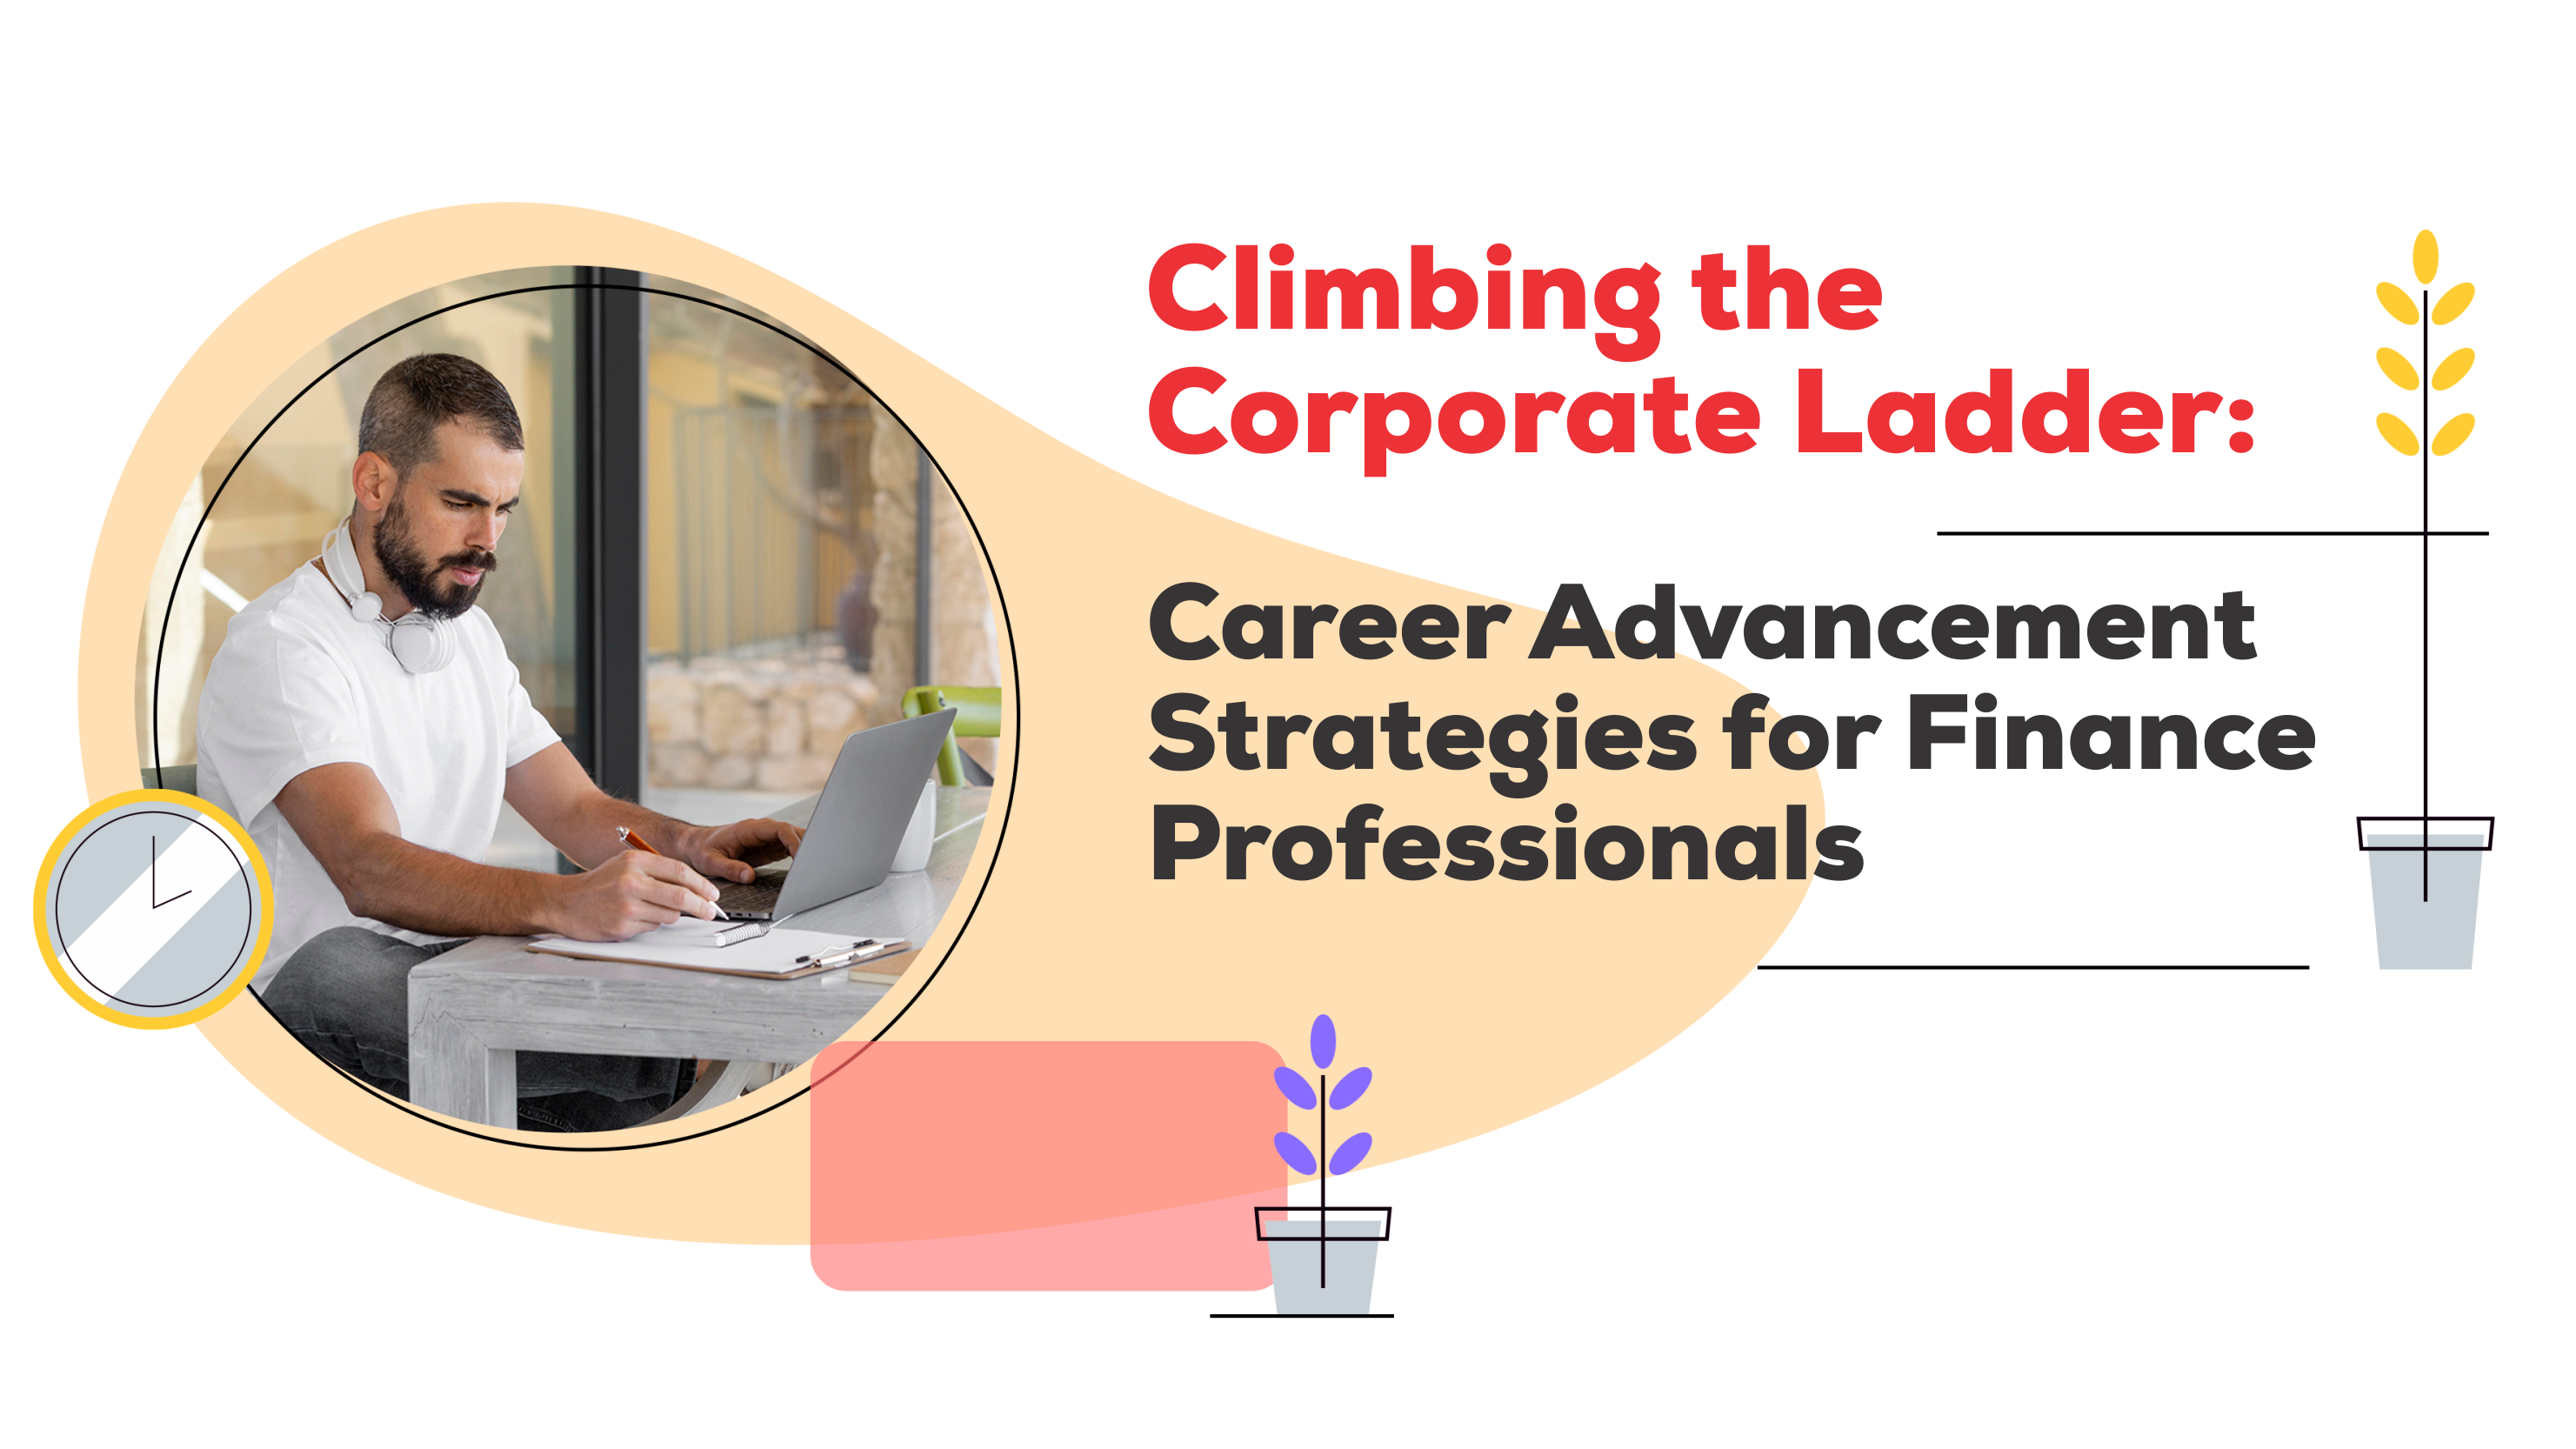 Climbing the Corporate Ladder: Career Advancement Strategies for Finance Professionals